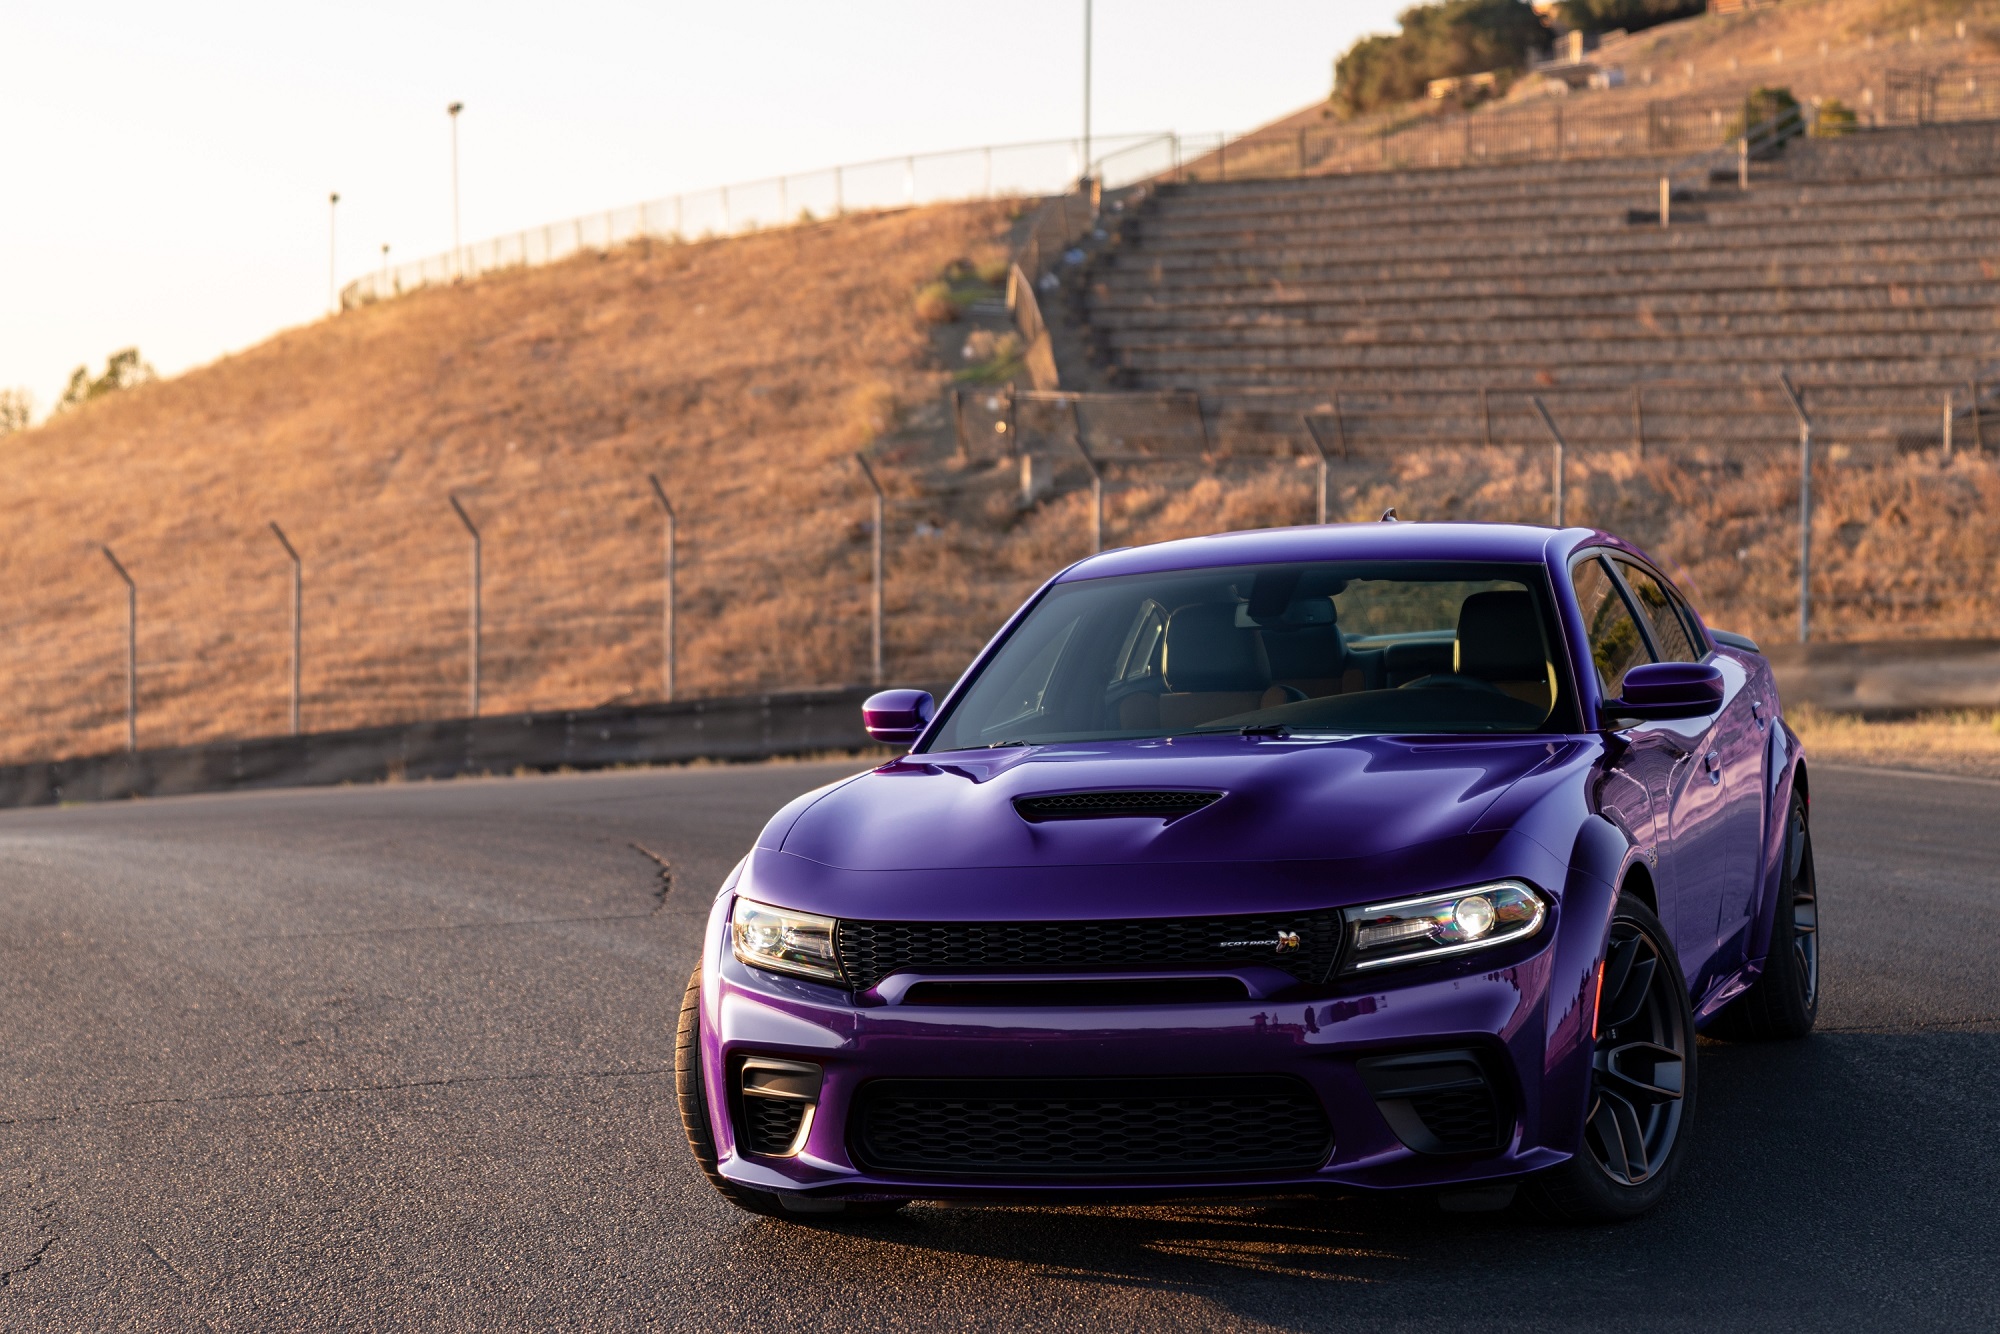 The Dodge Charger Last Call models celebrate the comfortable car before its discontinued just like the Chrysler 300.